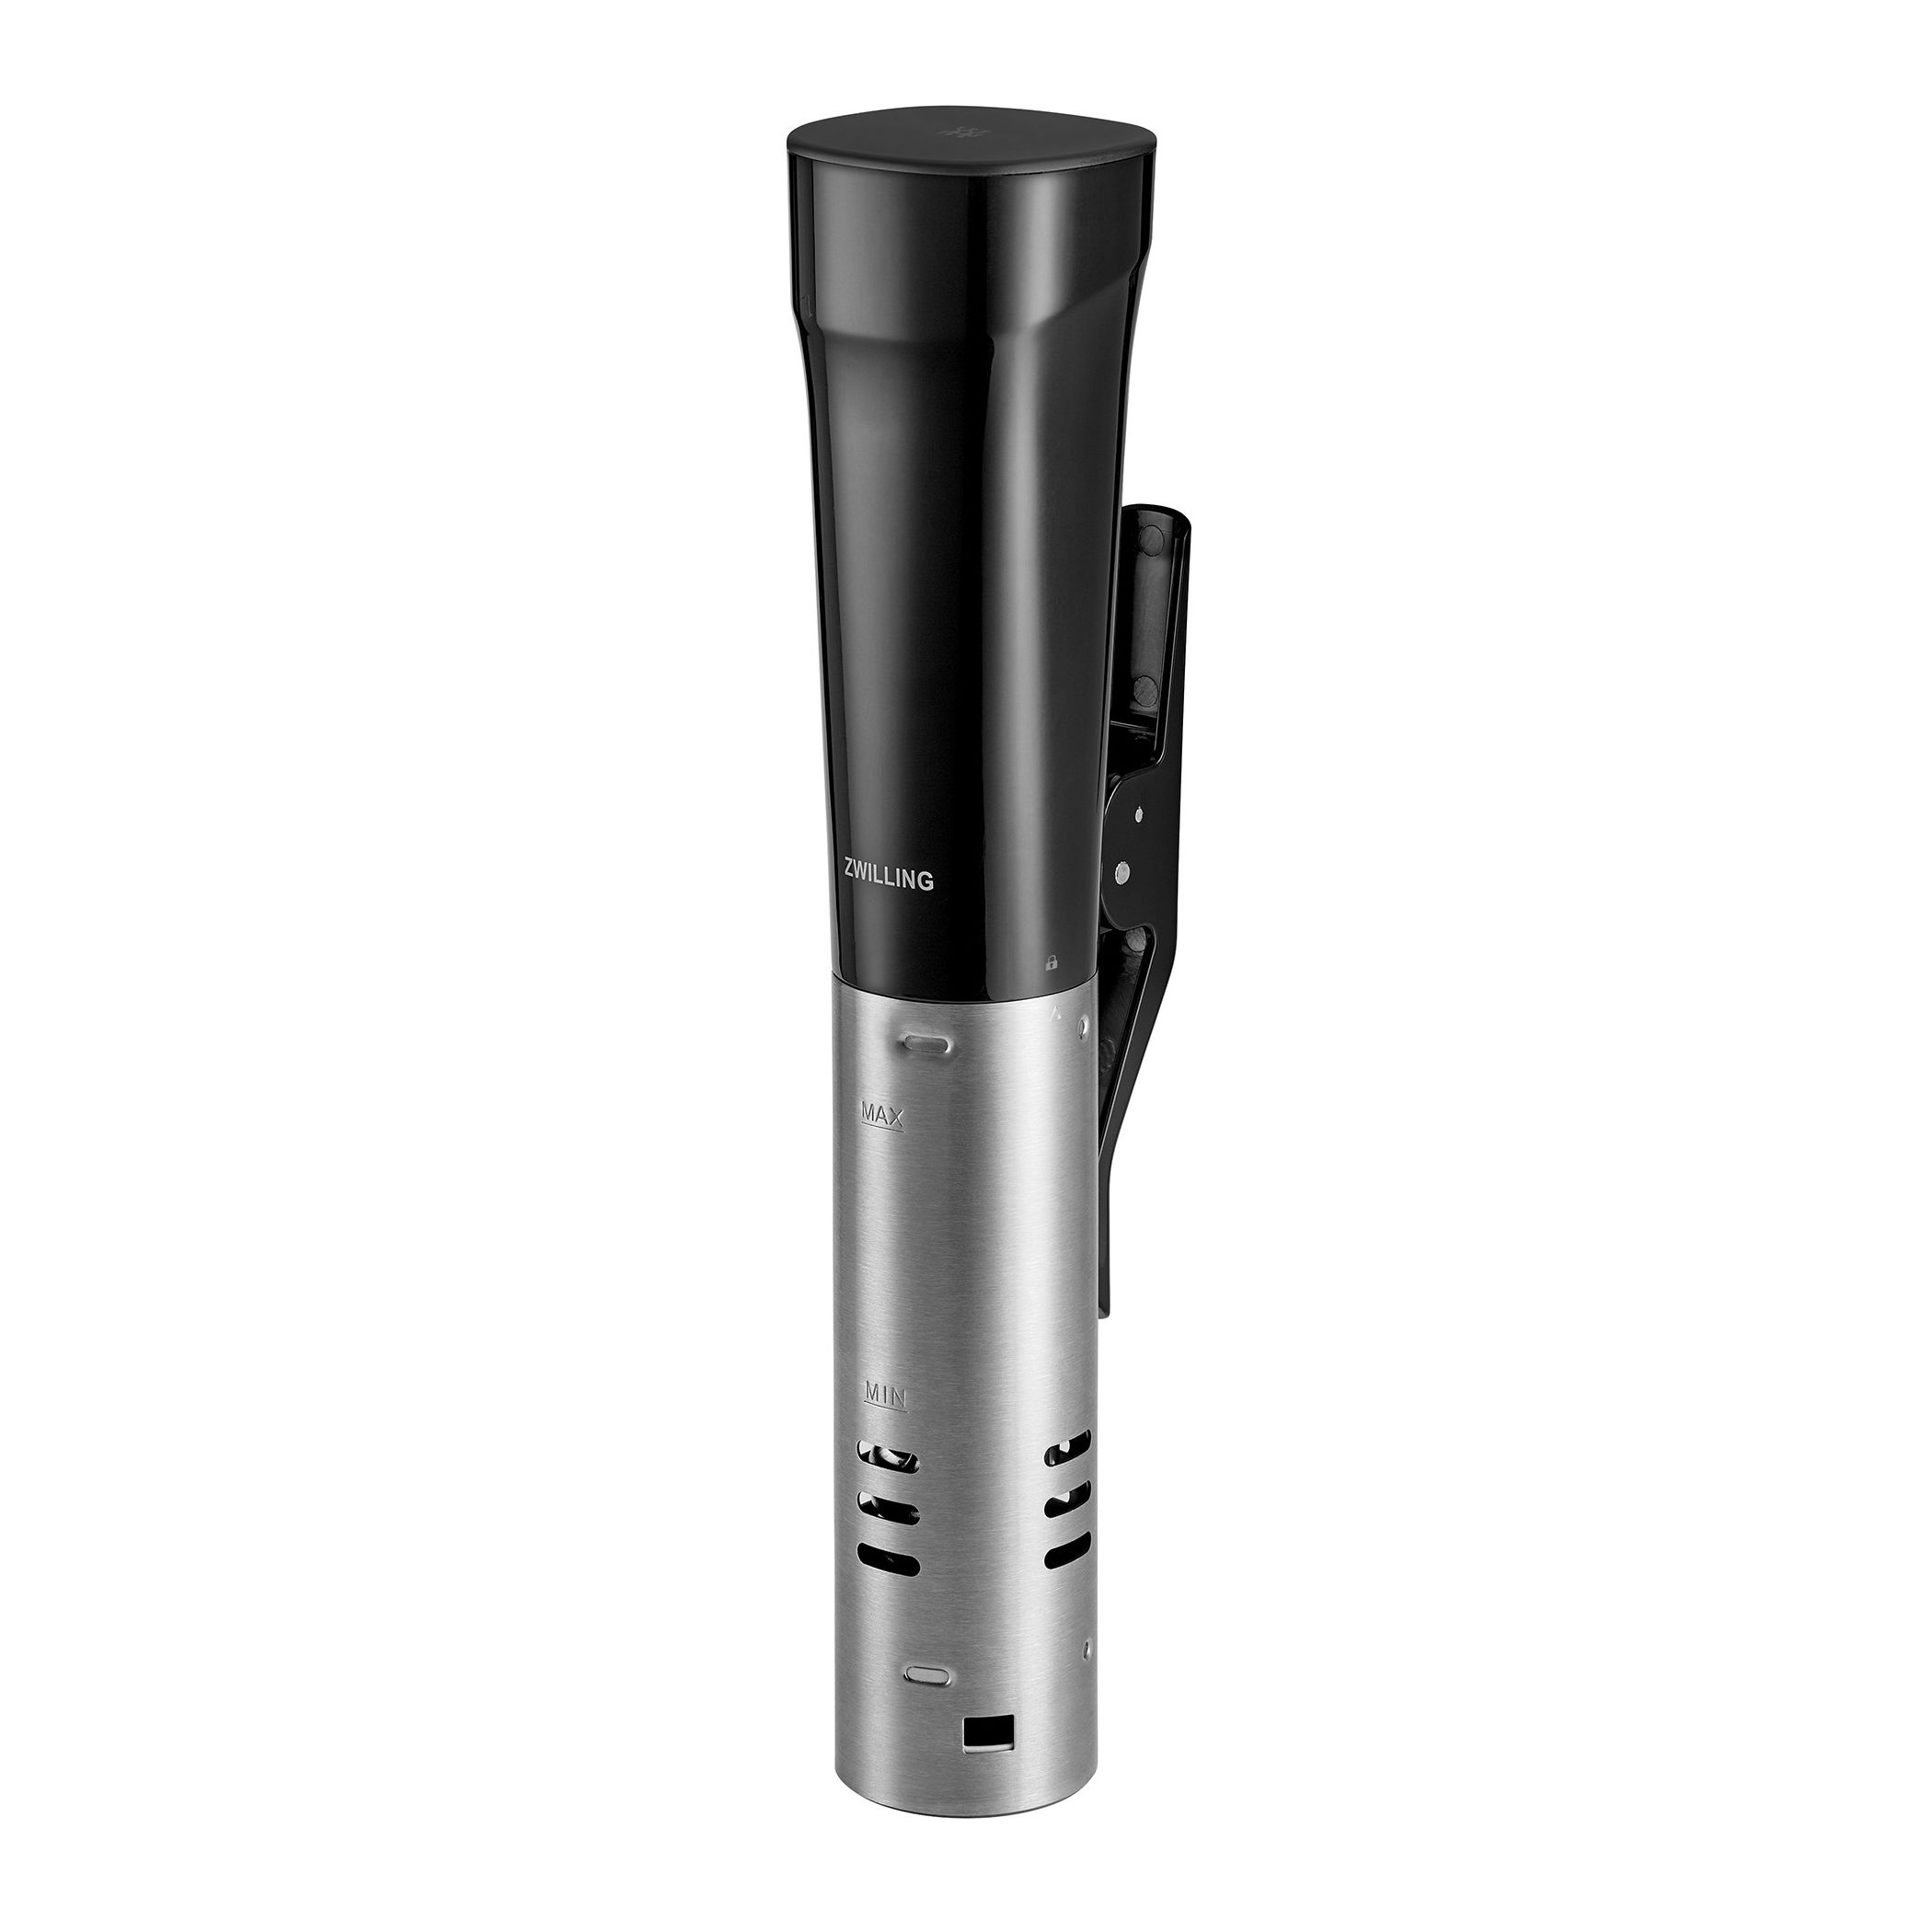 Zwilling Enfinigy Sous Vide Stick, Silver